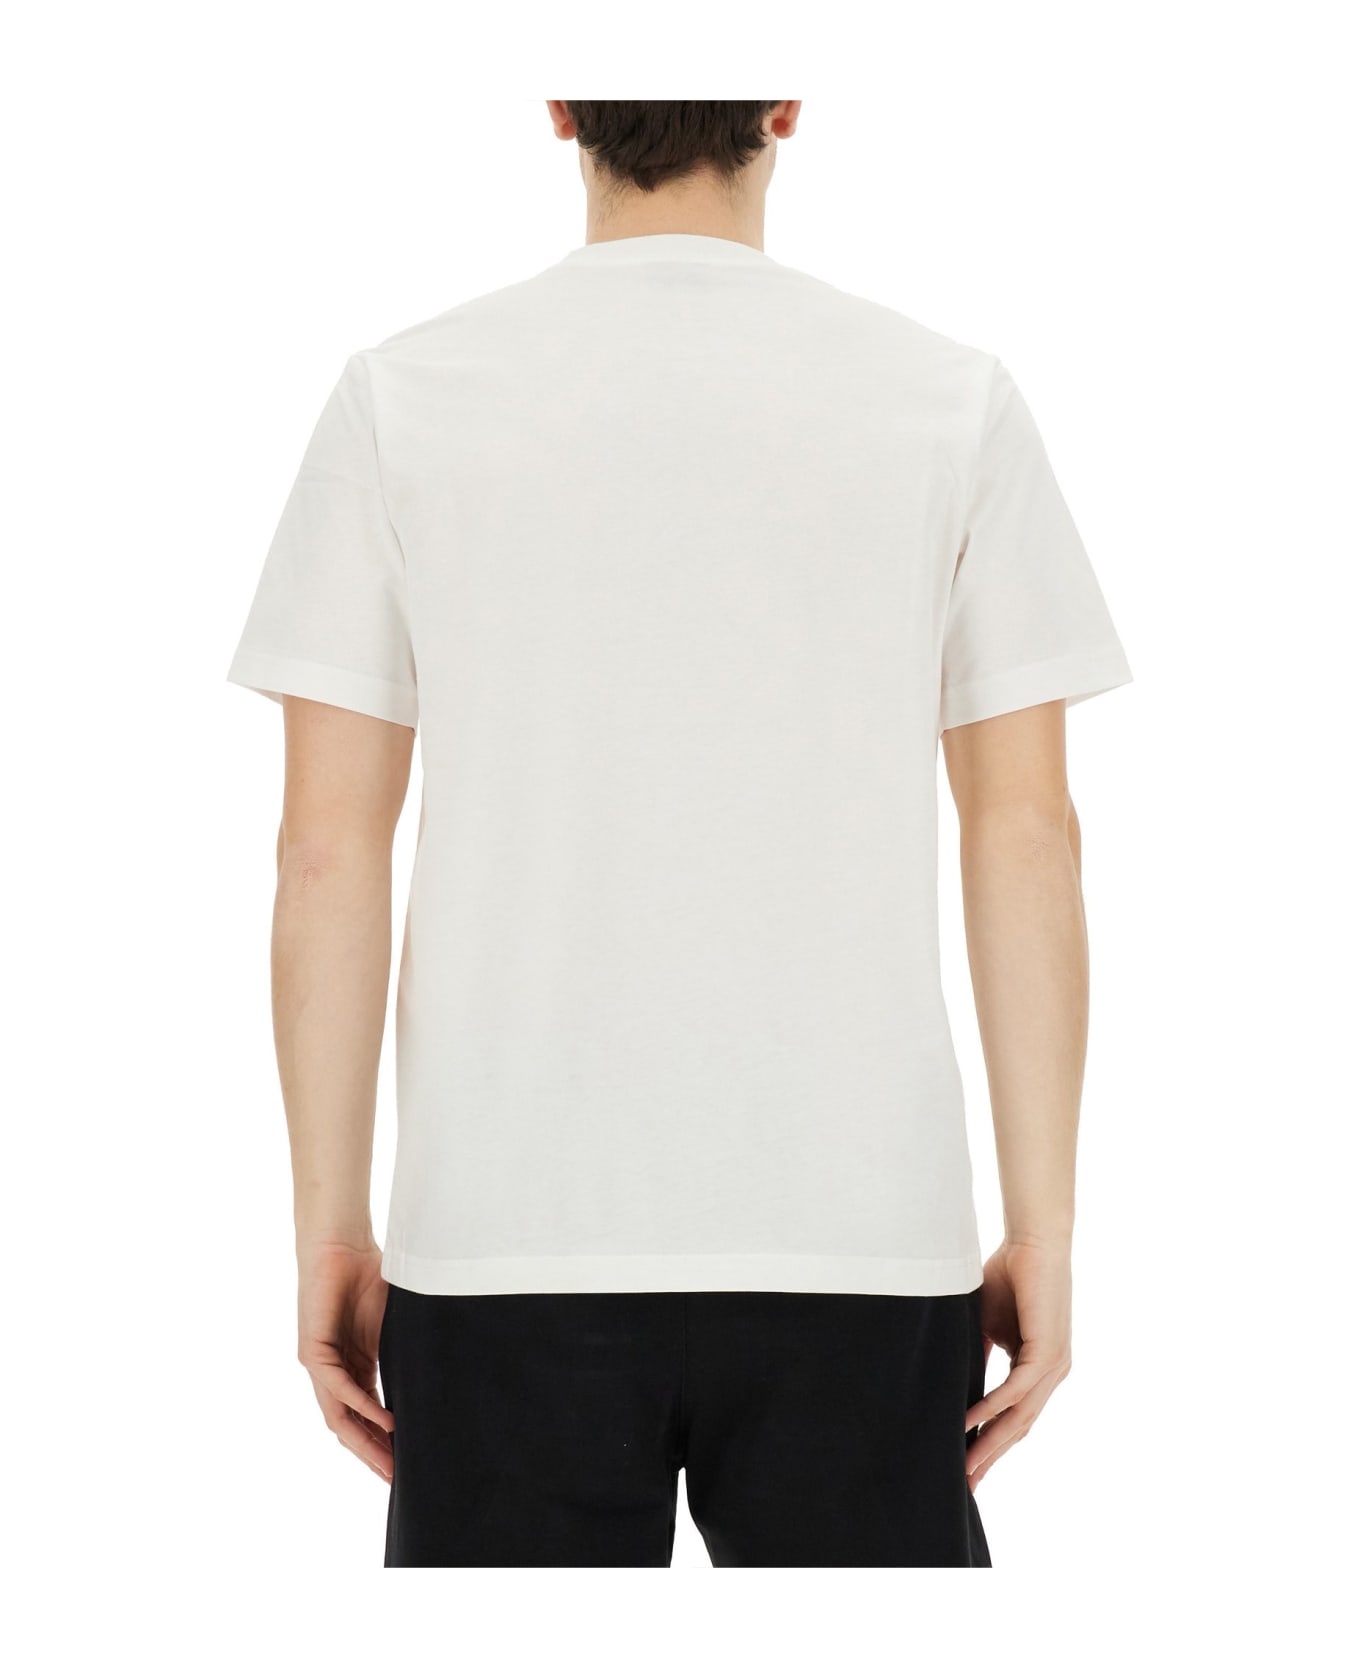 PS by Paul Smith Regular Fit T-shirt - Bianco シャツ